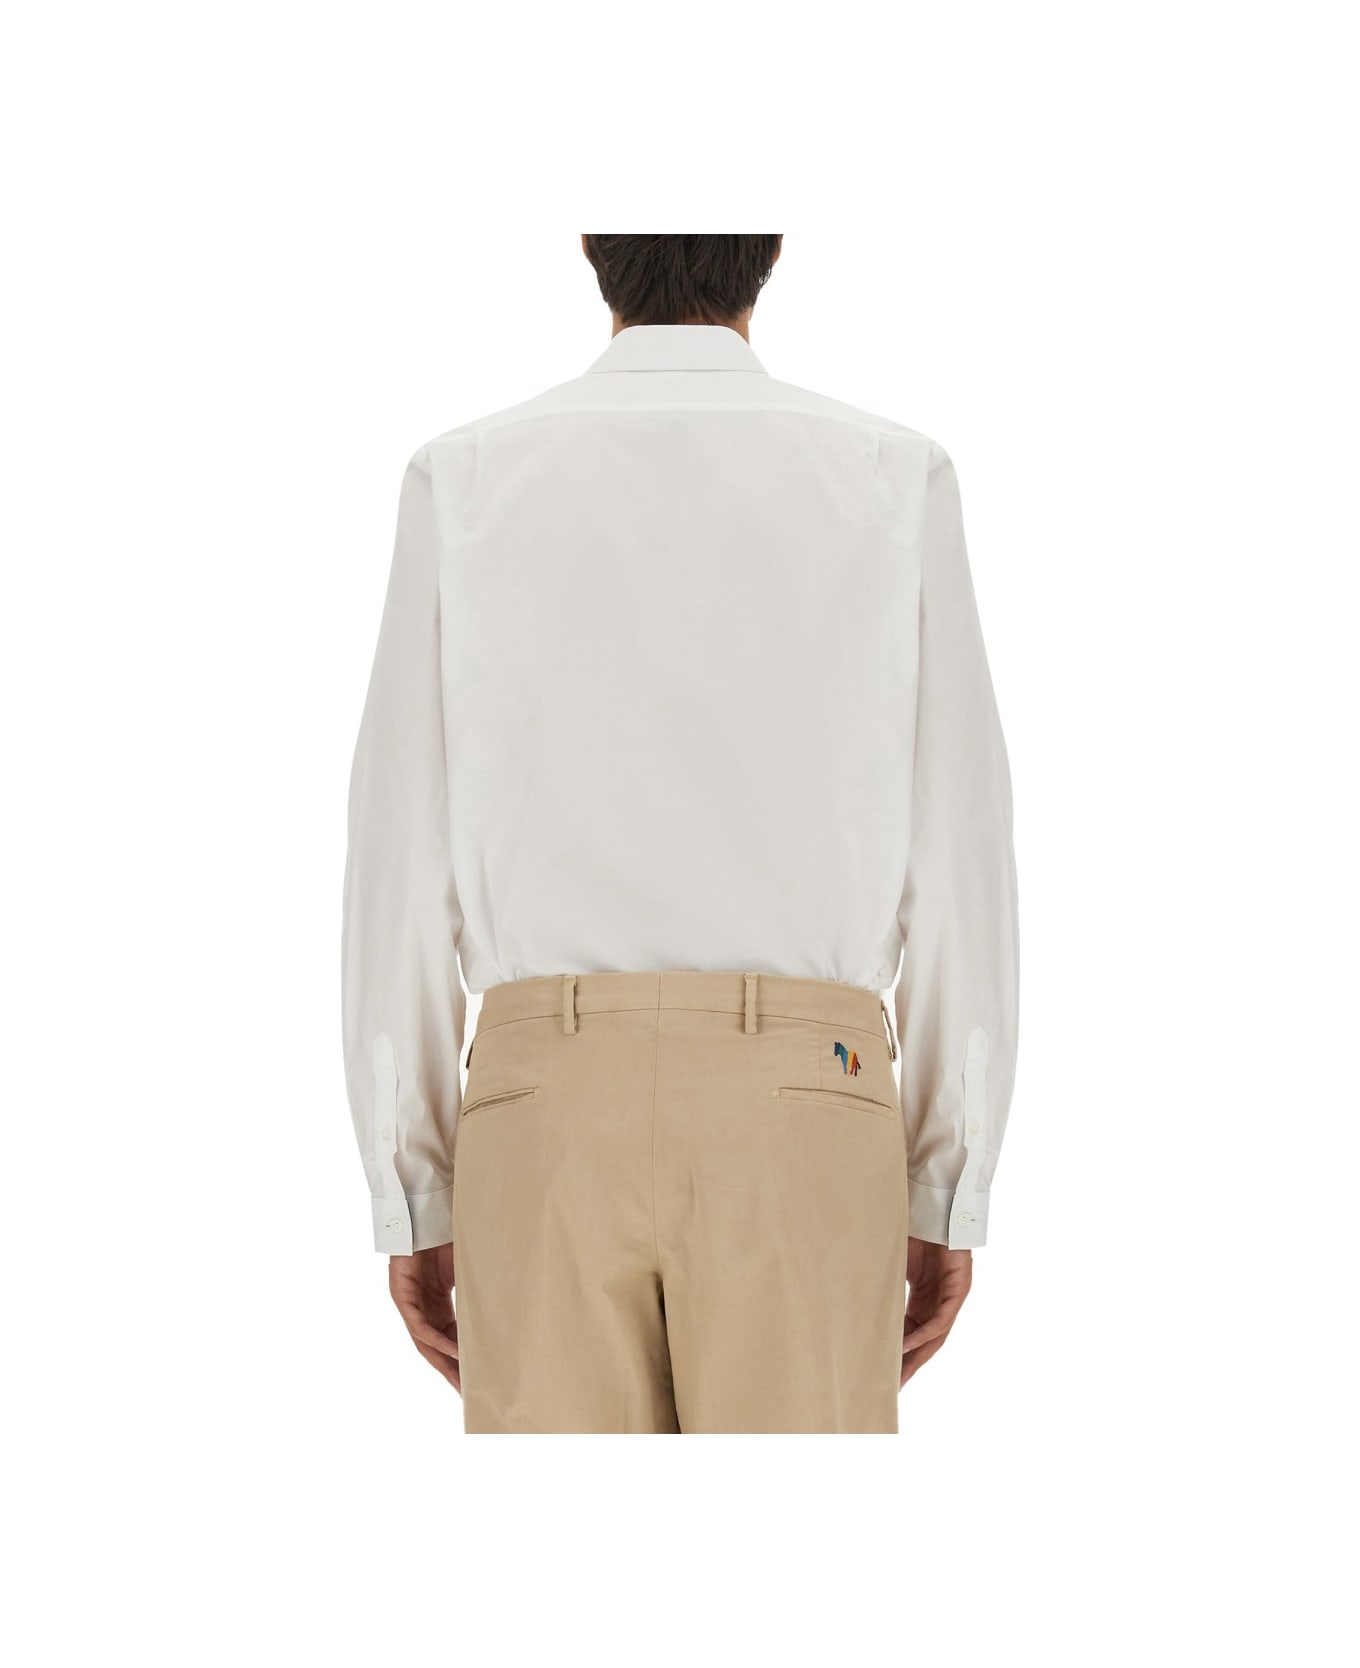 PS by Paul Smith Regular Fit Shirt - WHITE シャツ